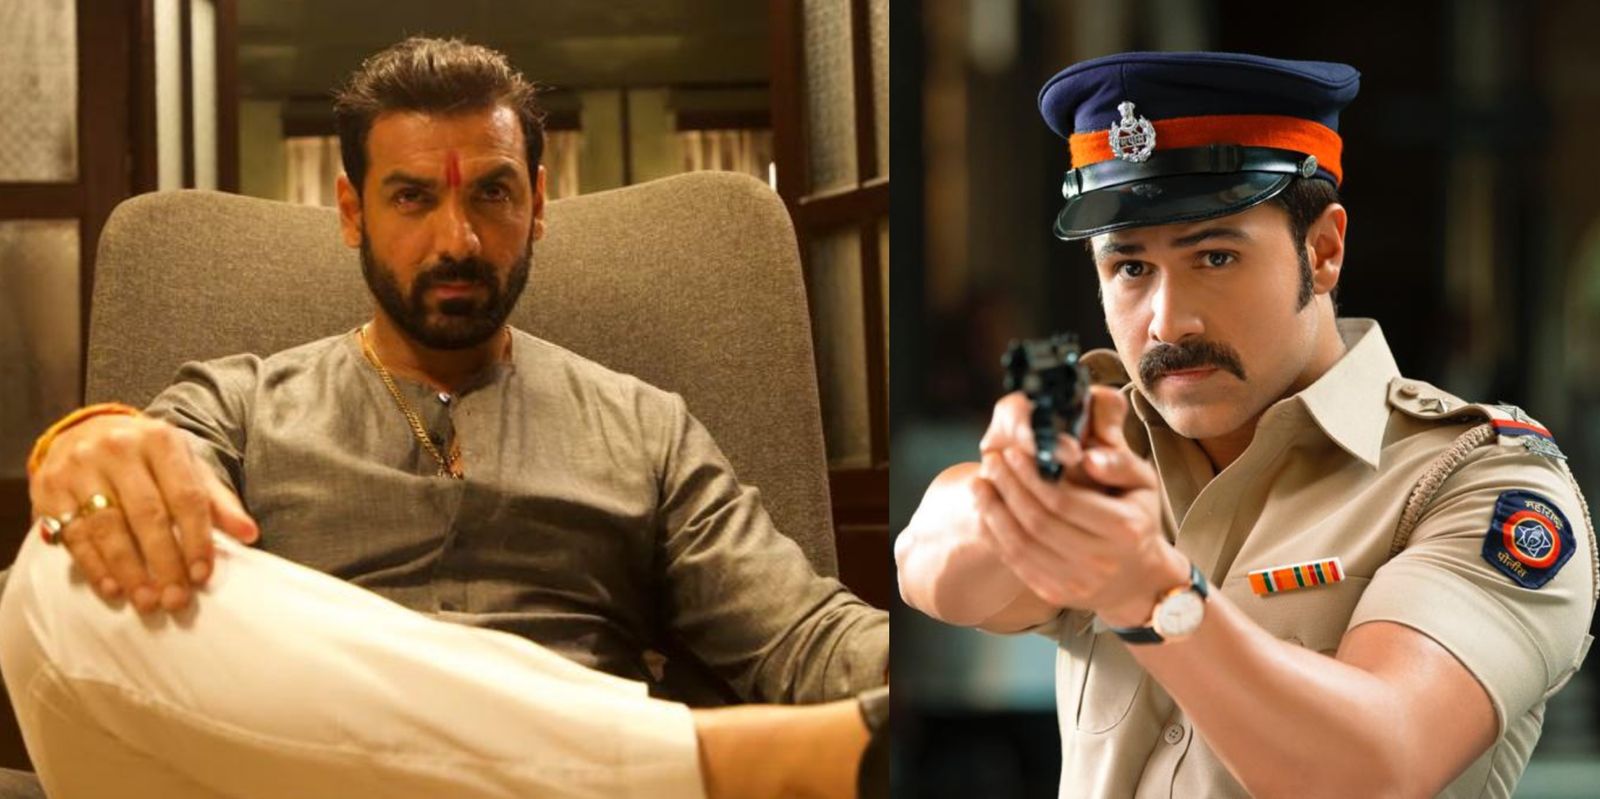 John Abraham, Emraan Hashmi Starrer Mumbai Saga To Be One Of The First Films To Resume Shoot; Cast To Travel To Hyderabad